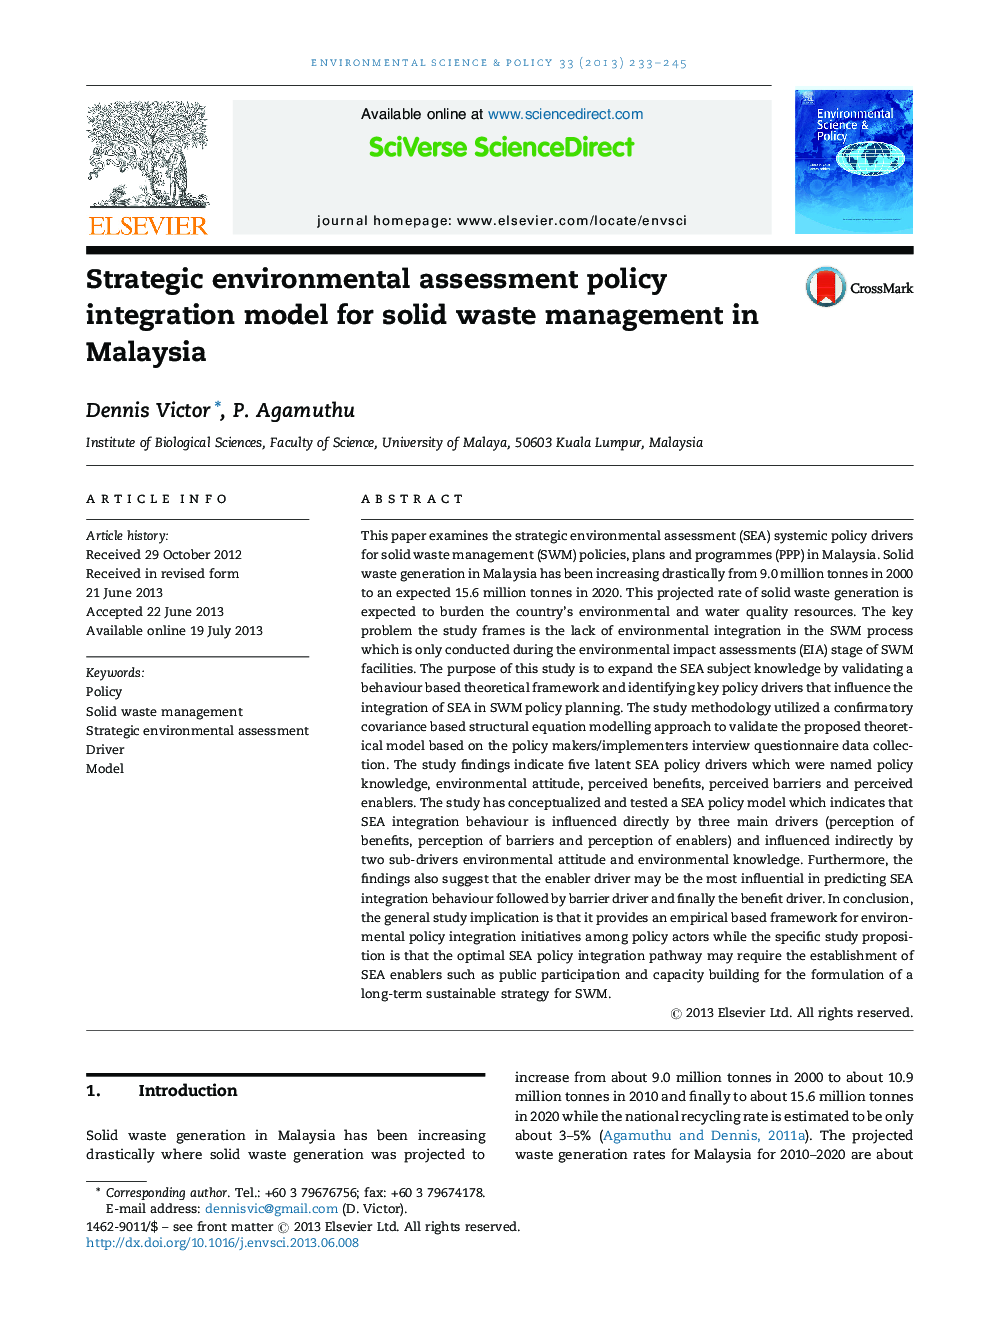 Strategic environmental assessment policy integration model for solid waste management in Malaysia